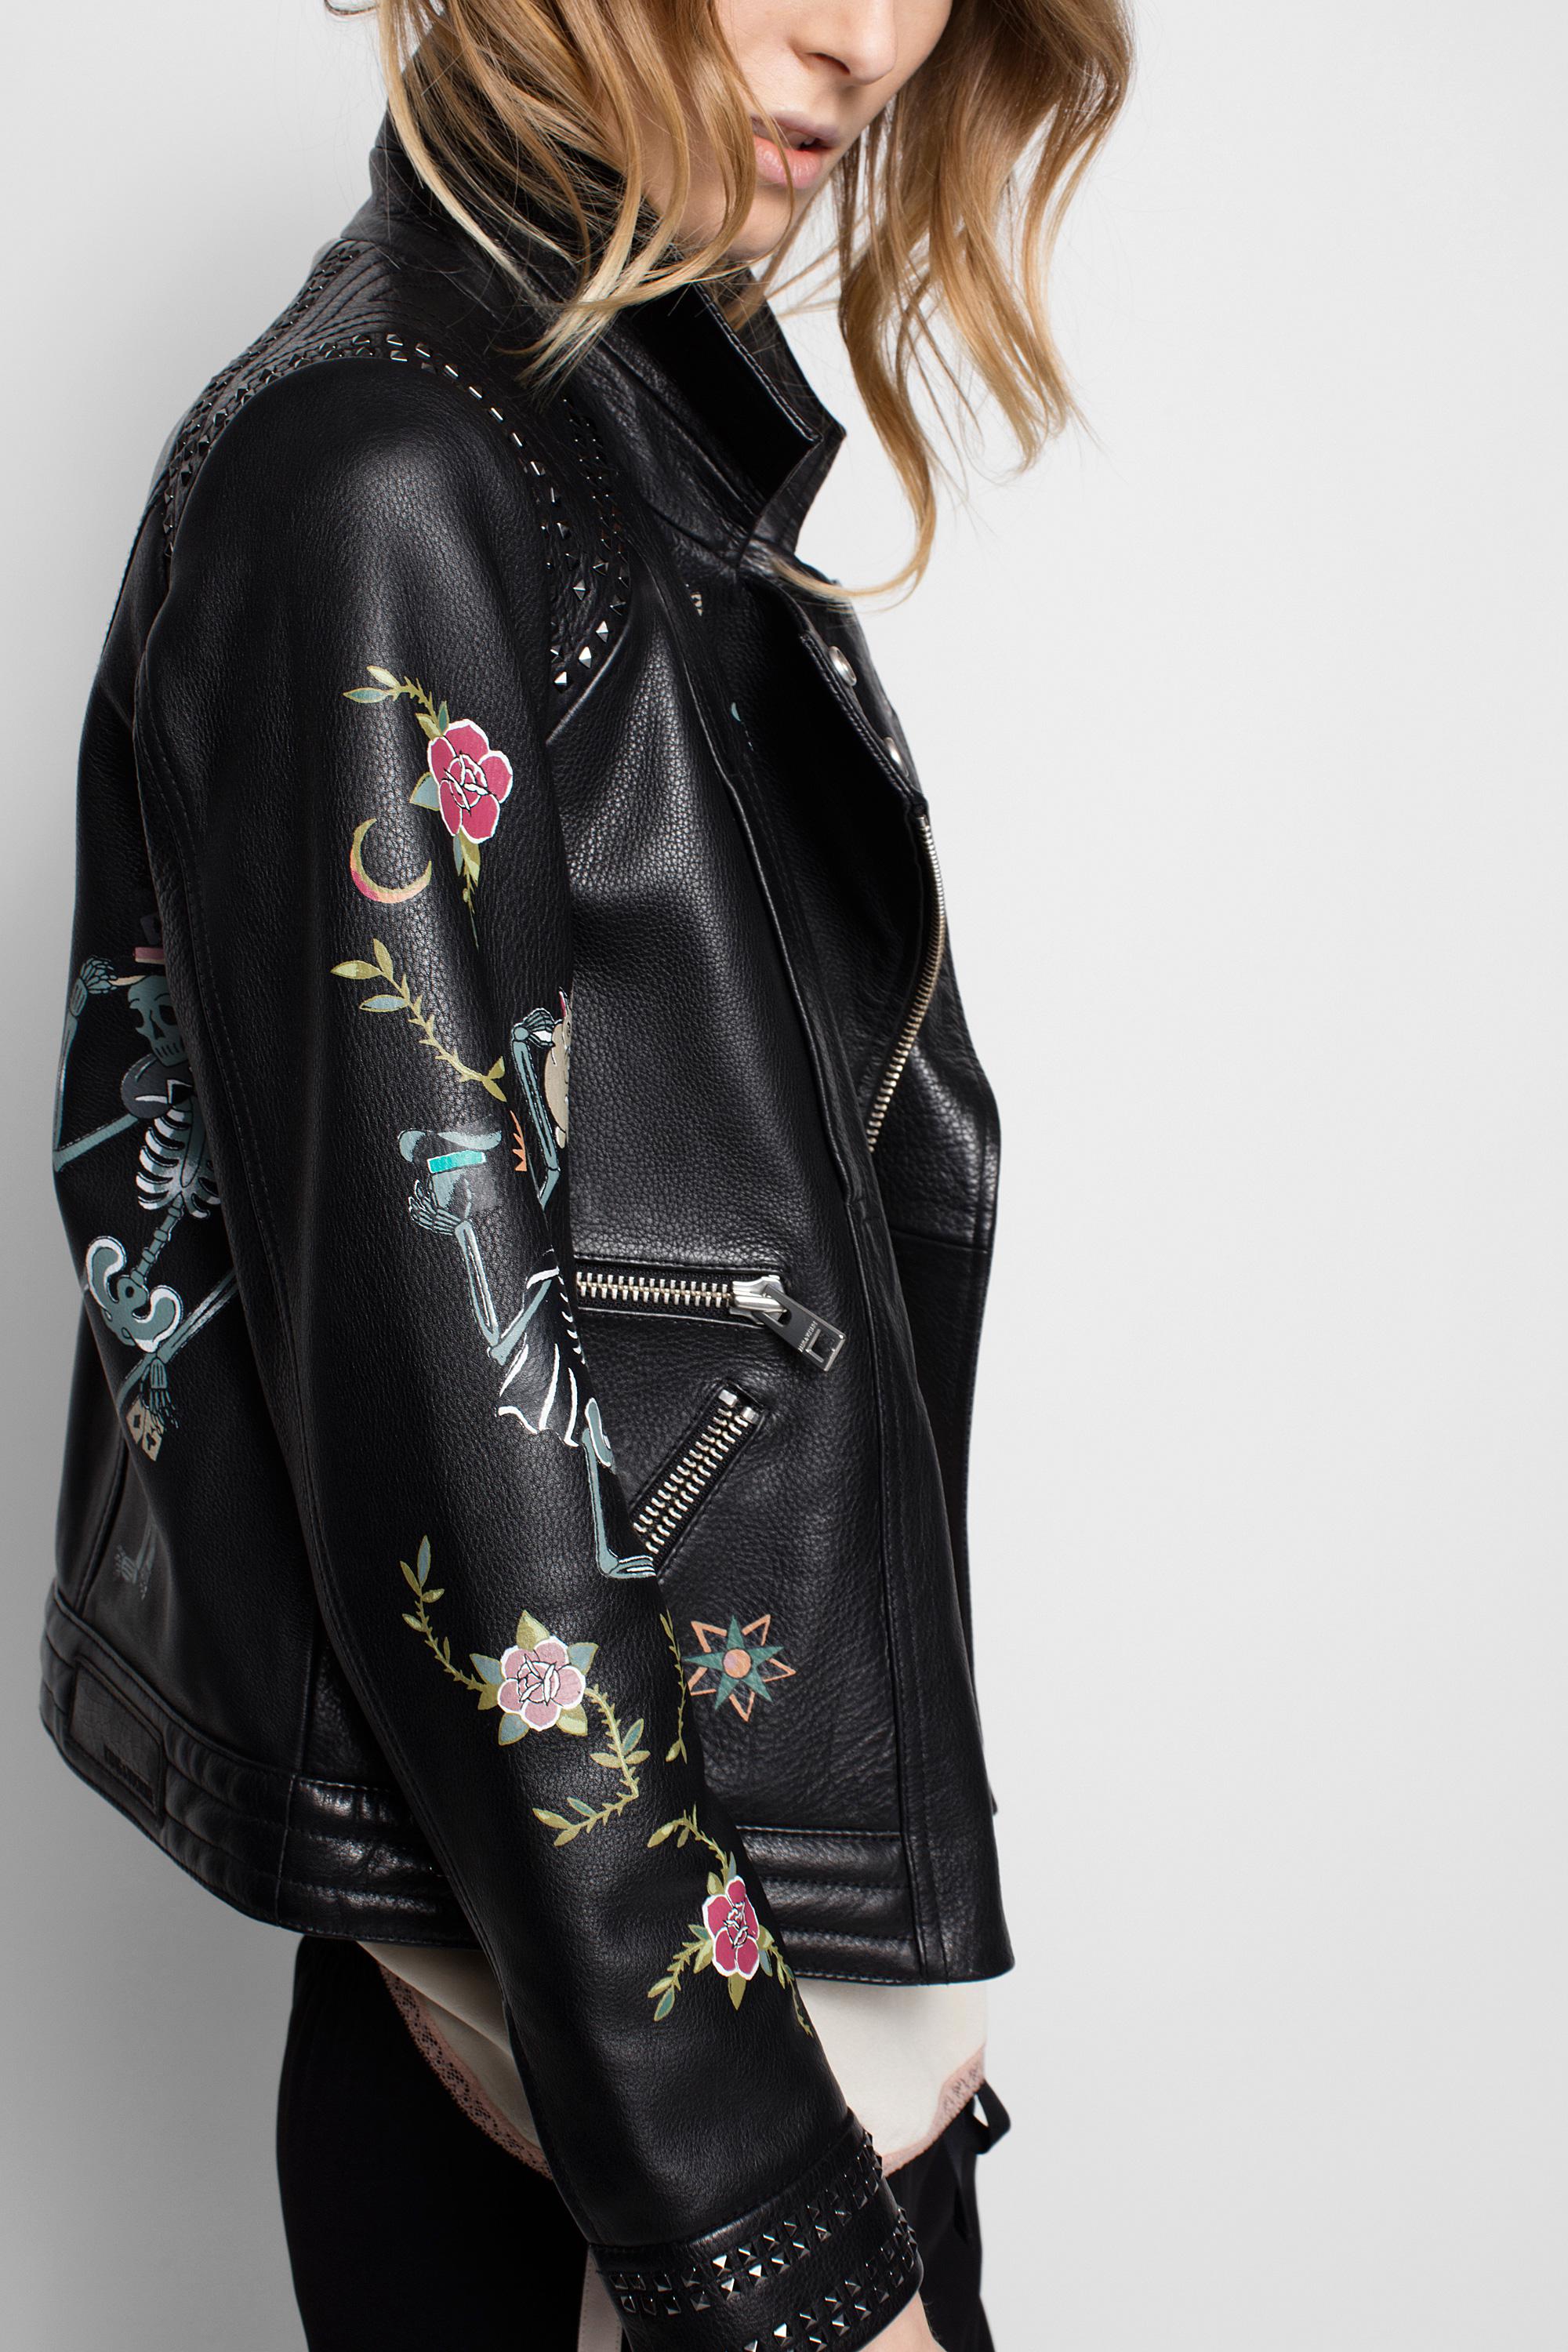 Zadig & Voltaire Leather Kawai Tattoo Deluxe Jacket in Black - Lyst